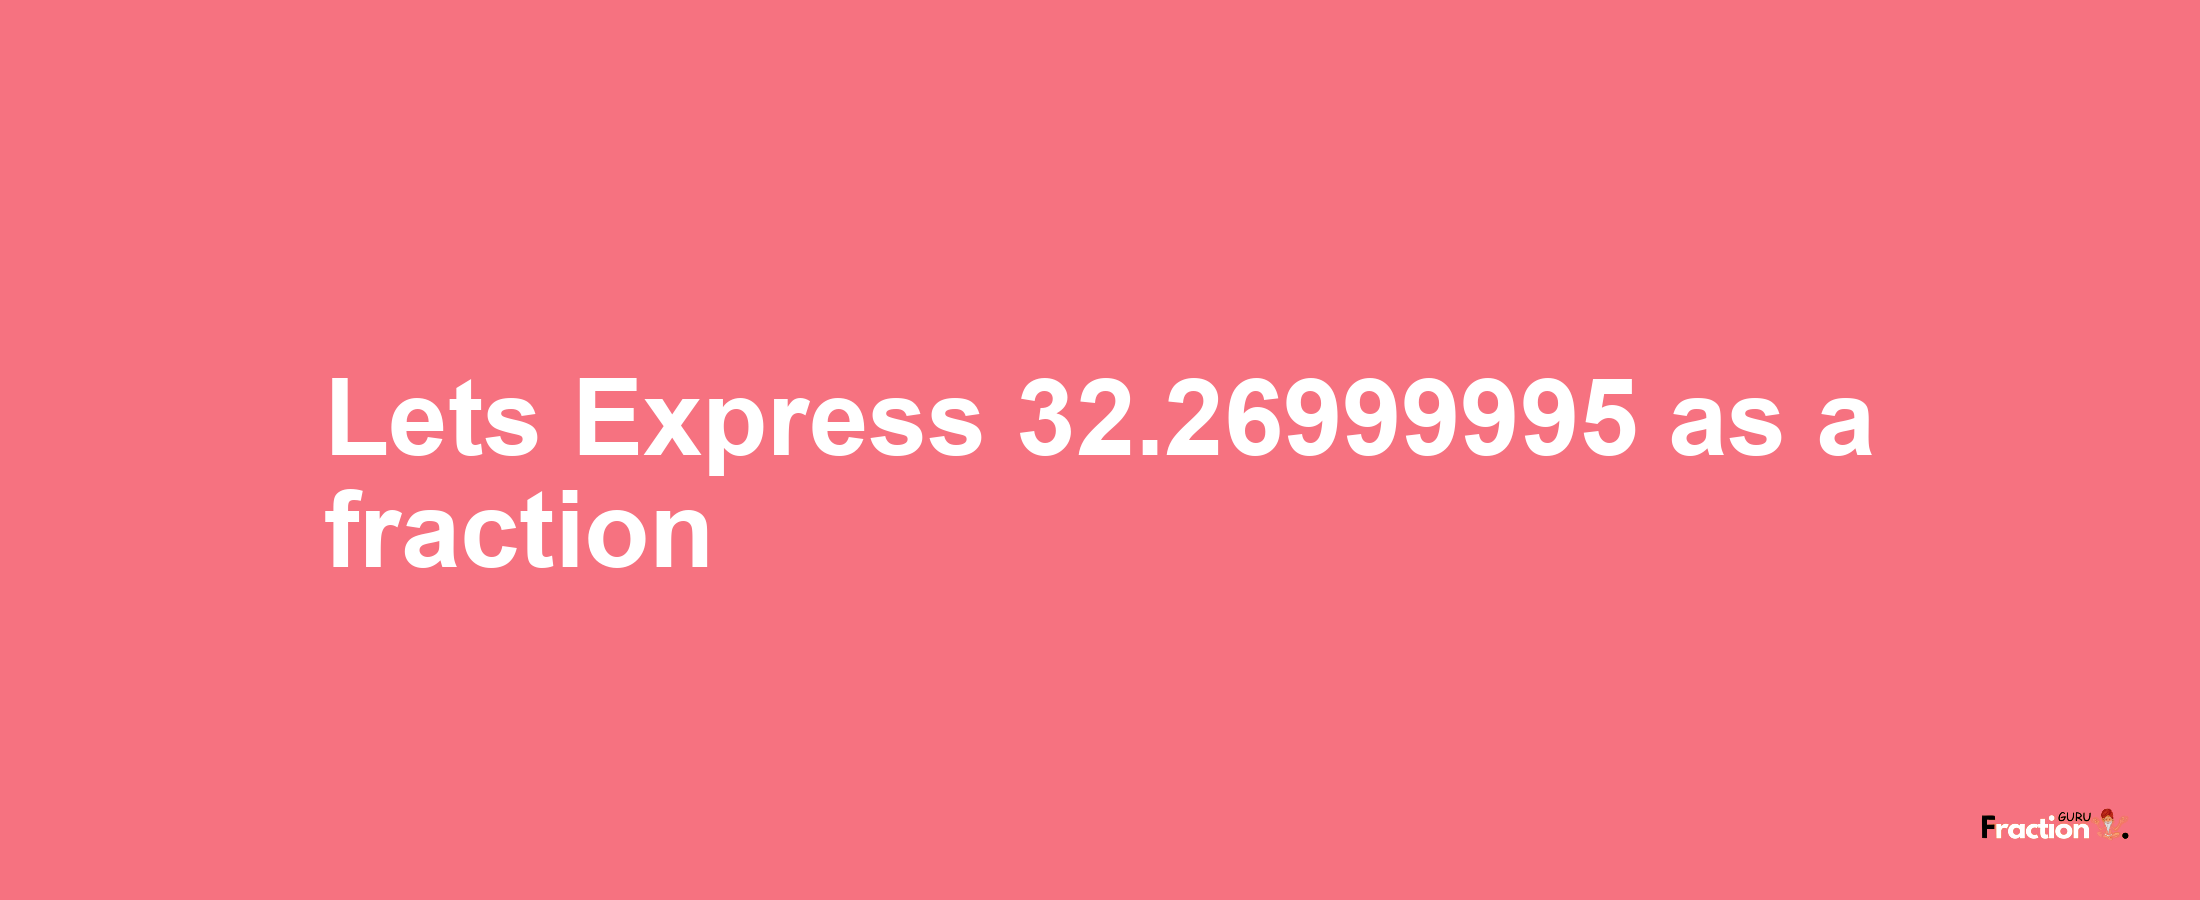 Lets Express 32.26999995 as afraction